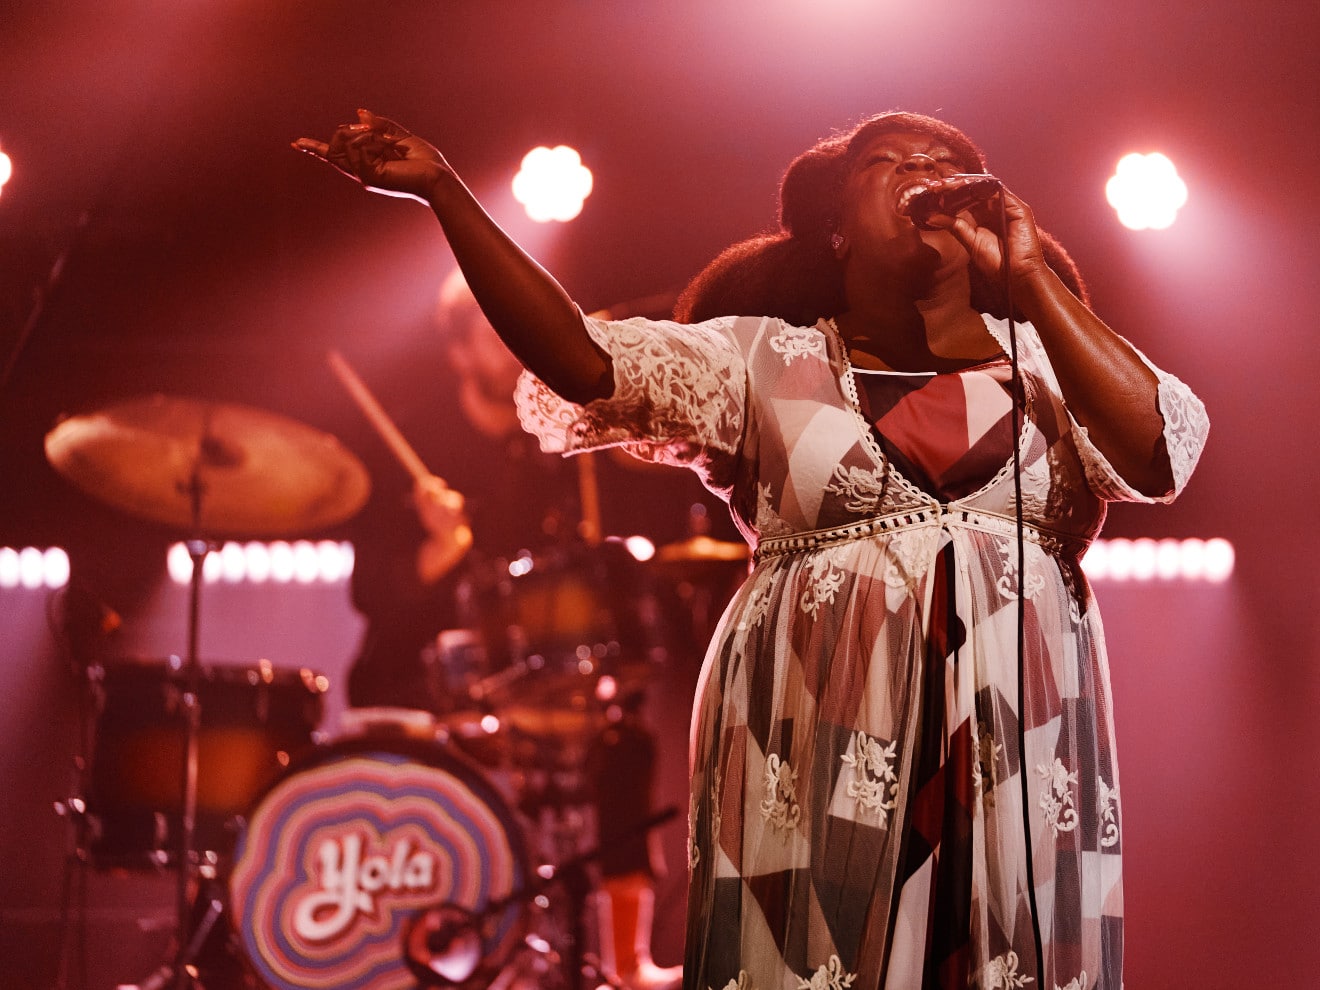 Yola Performs “I Don’t Wanna Lie,” Reveals Additional 2020 Tour Dates